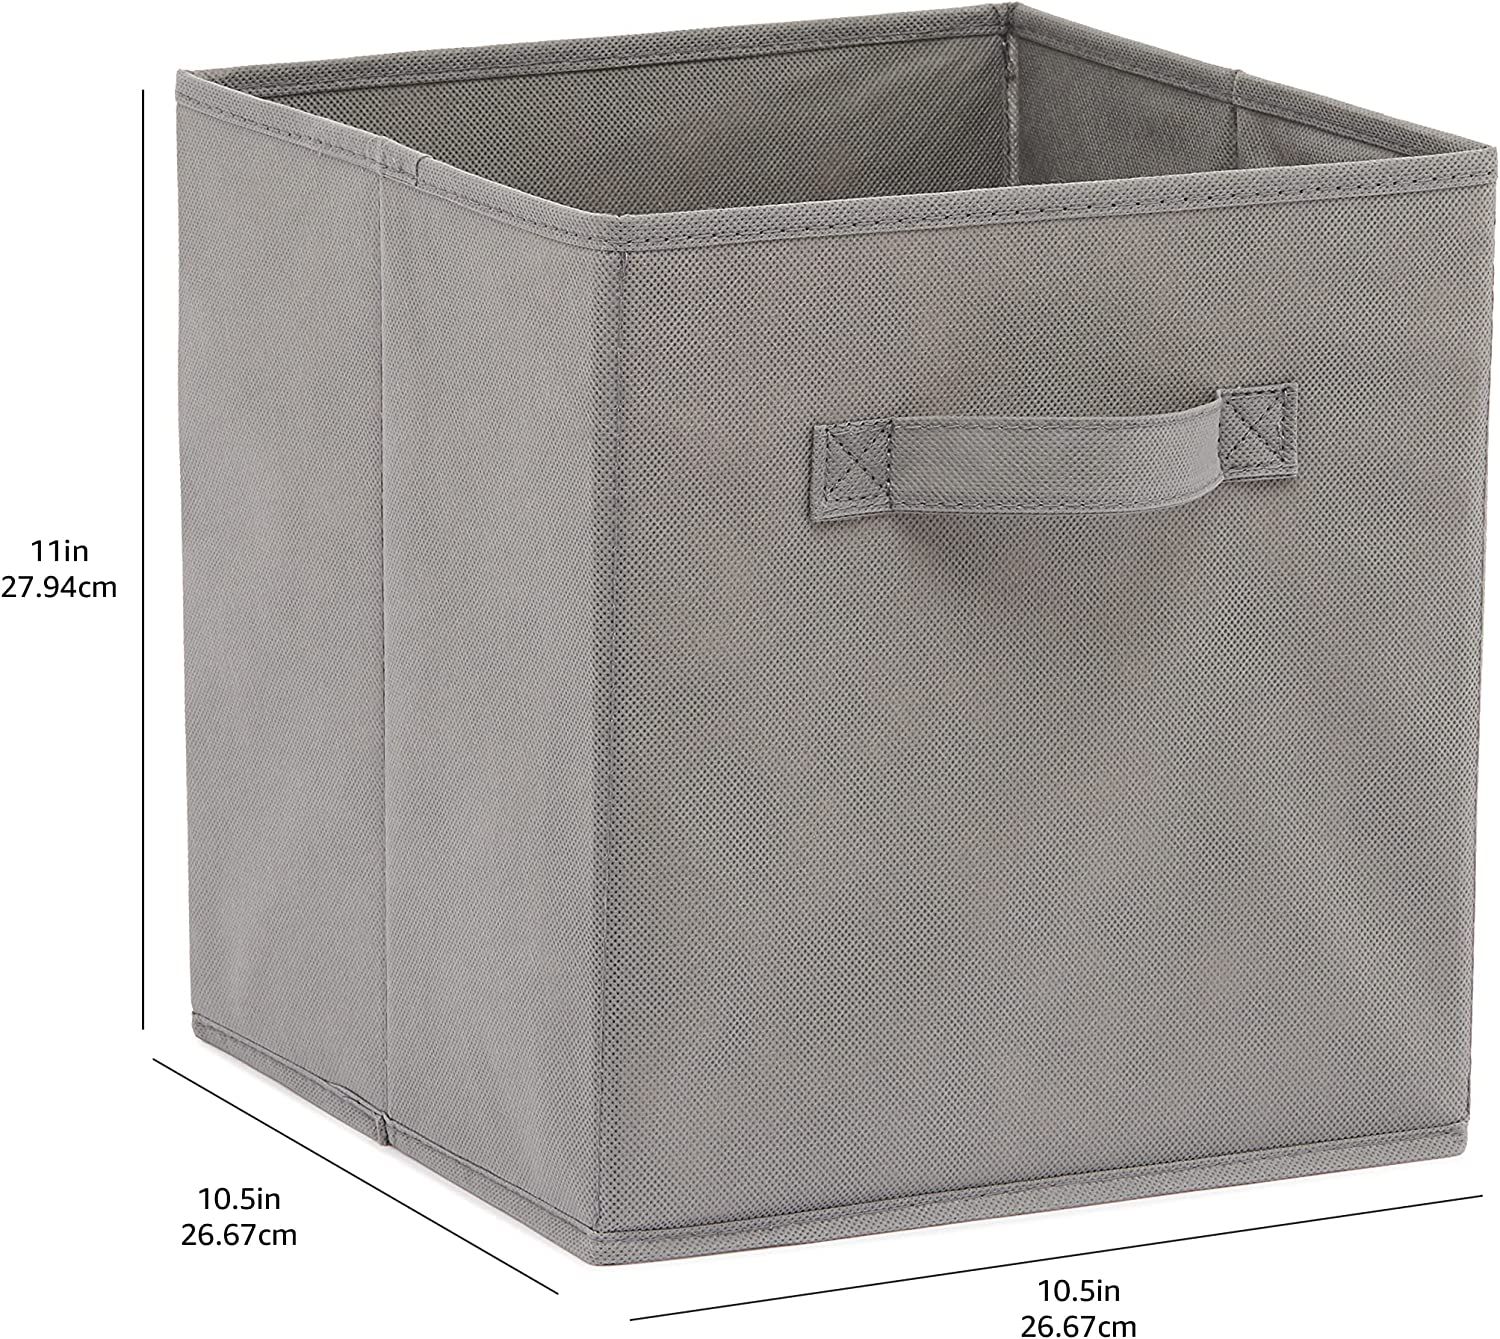 Amazon Basics Collapsible Fabric Storage Cubes Organizer with Handles, Gray - Pack of 6 | Amazon (US)